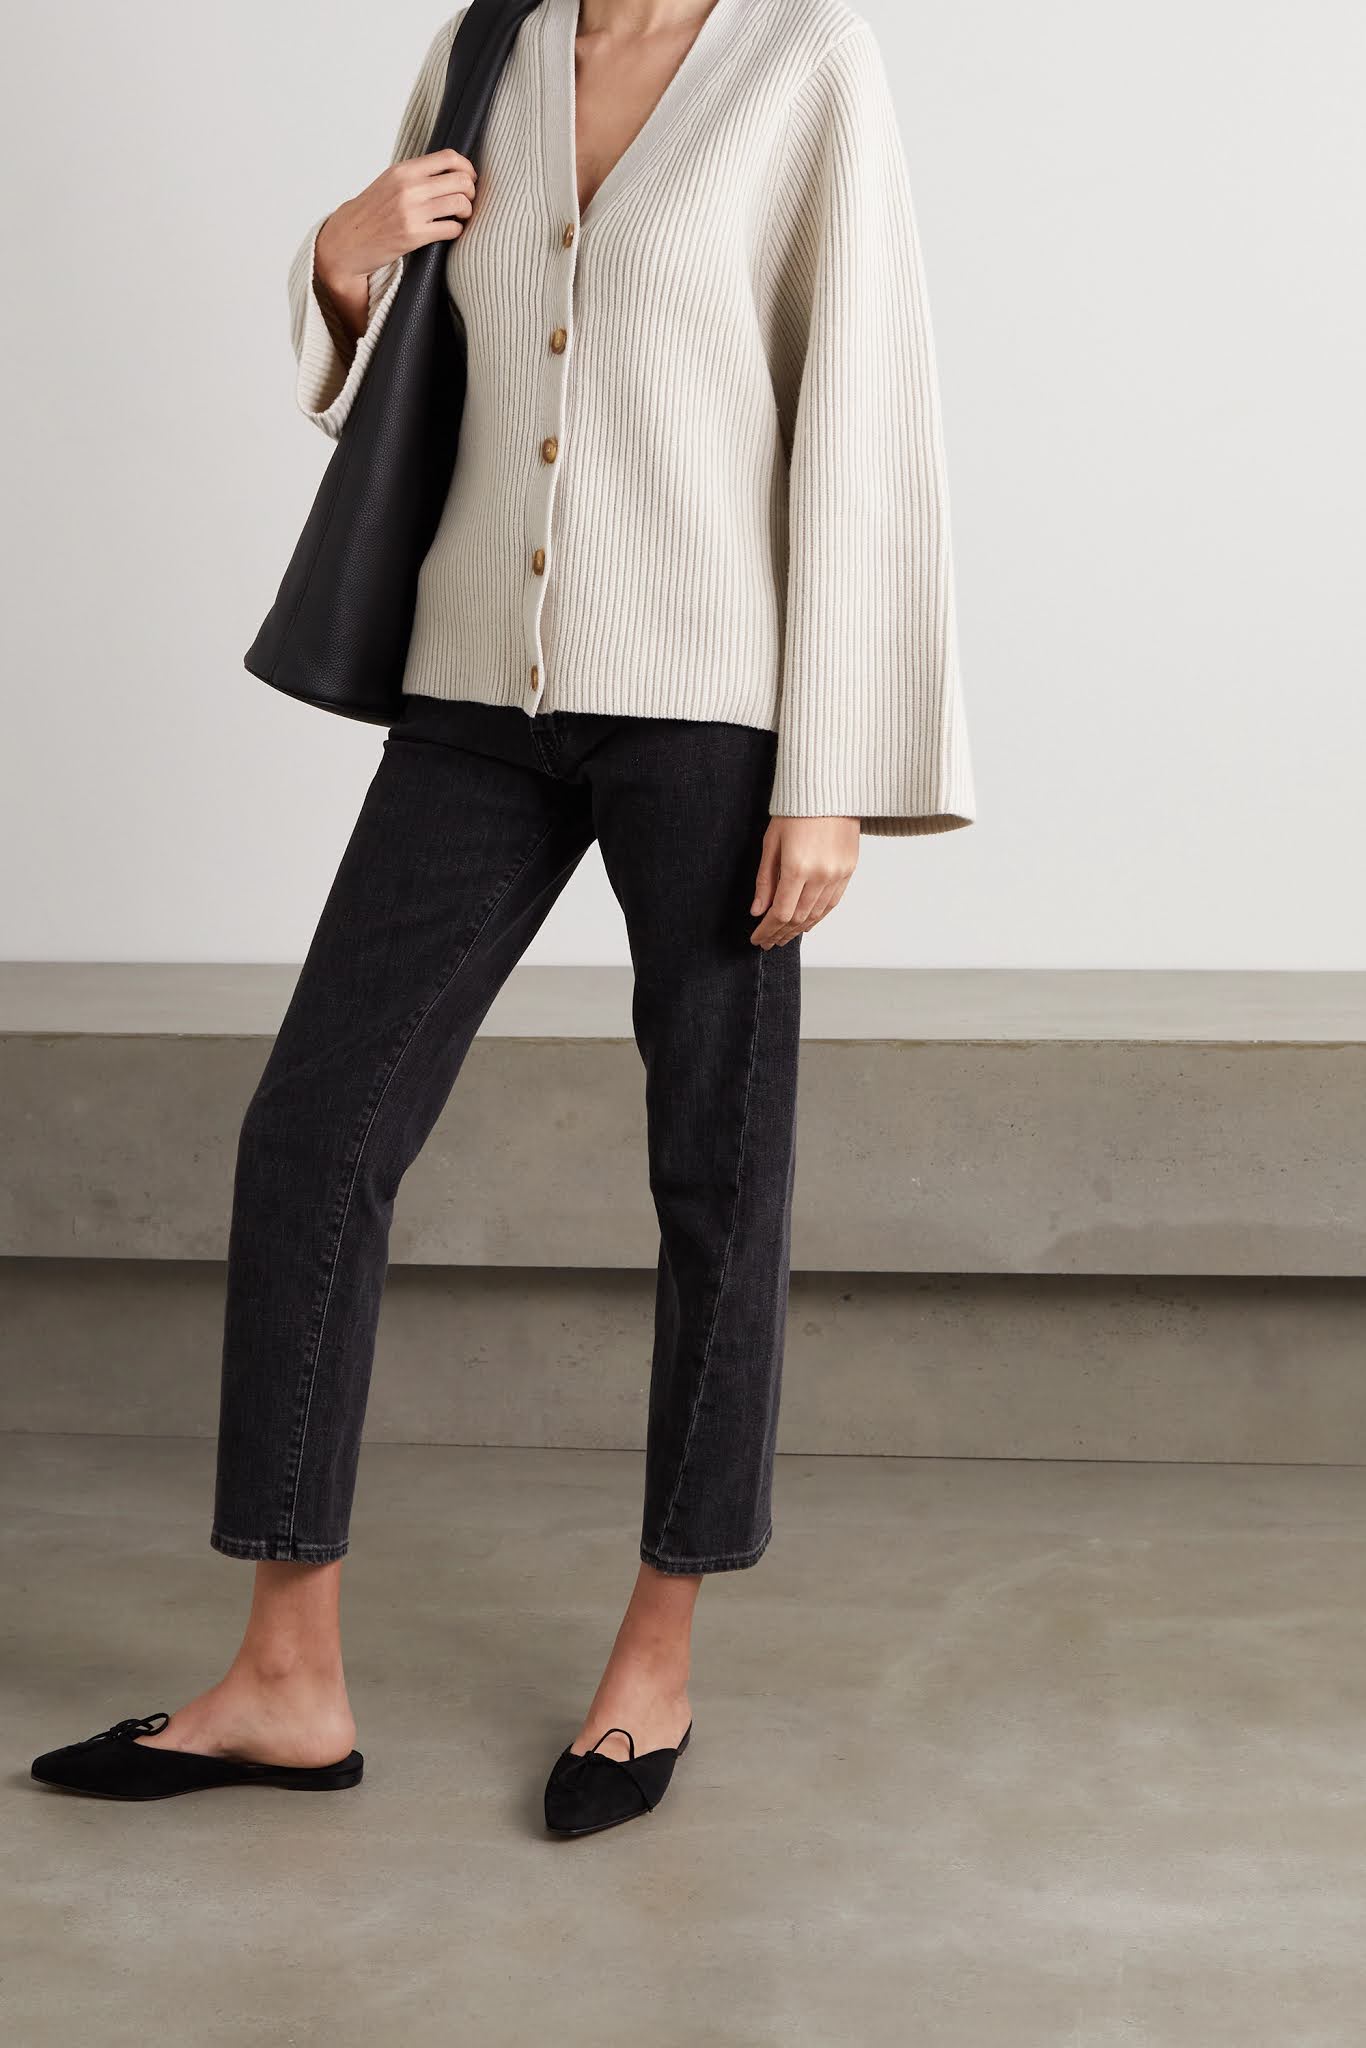 The Minimalist Spring Outfit I Wish I Was Wearing Right Now